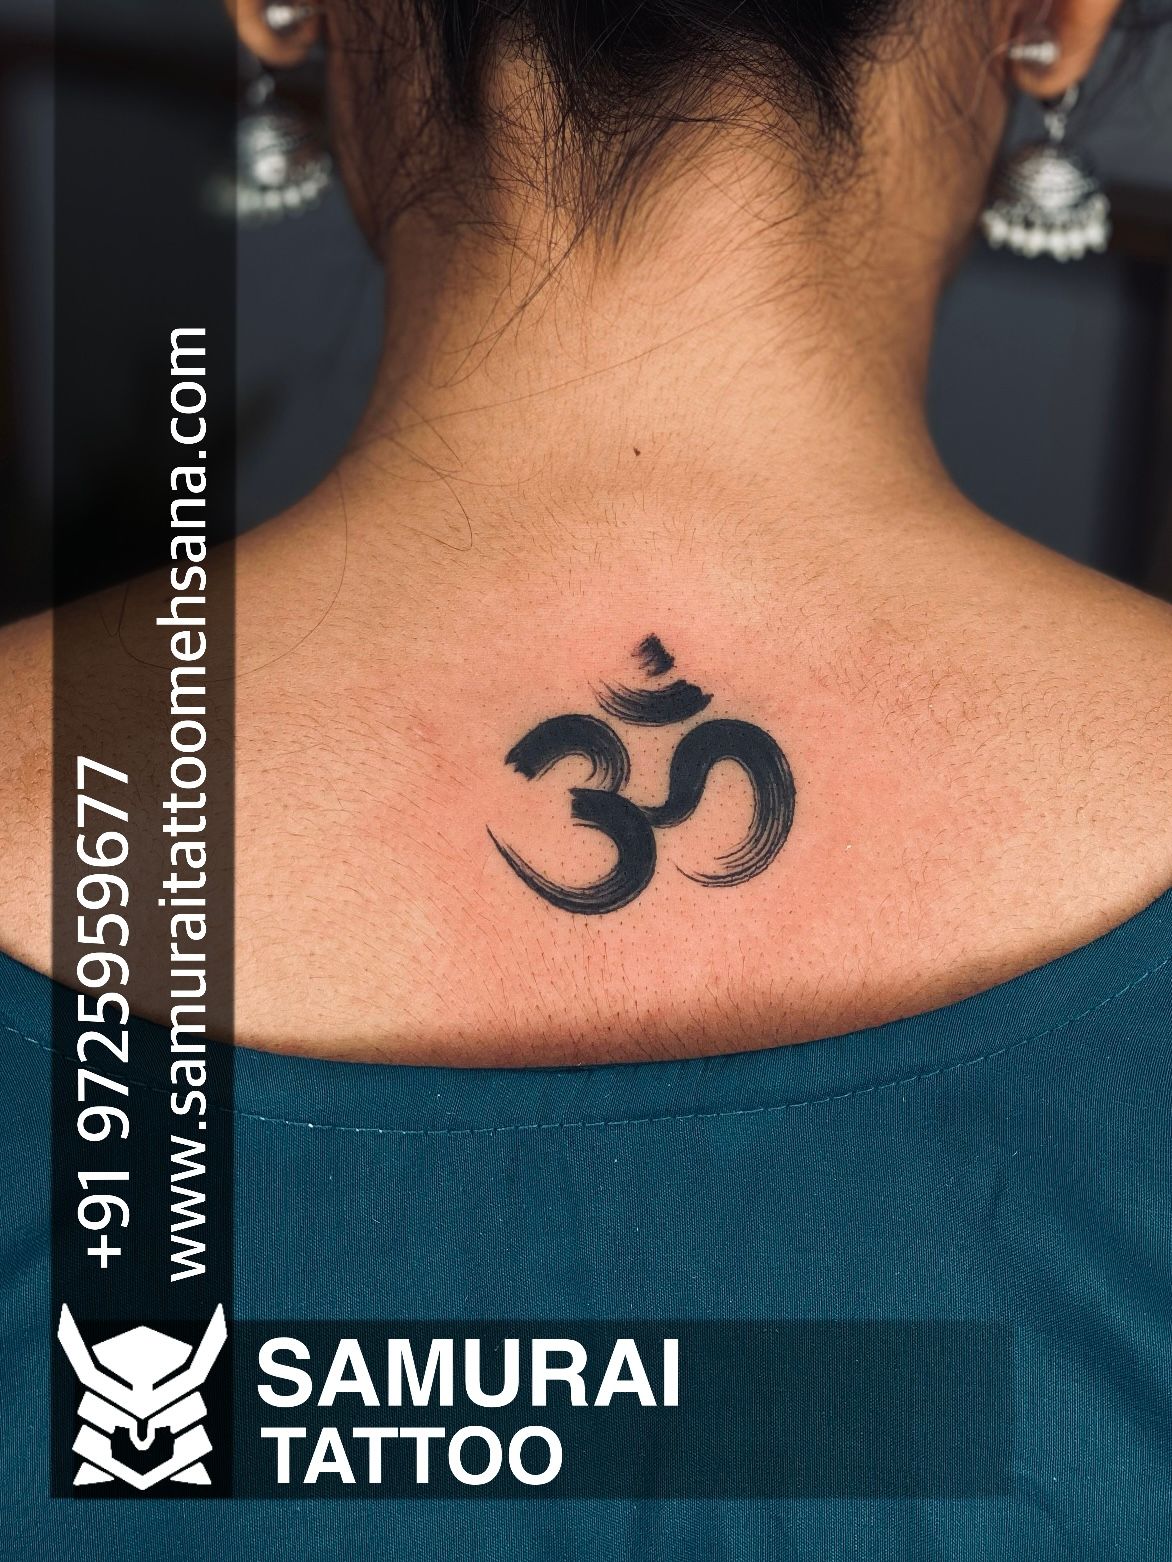 Buddha Tattoo Studio - This Om symbol tattoo is at its best hosting Lord  Shiva, it symbolizes the true role of God, the creator, preserver, and the  destroyer. For more ethnic tattoo